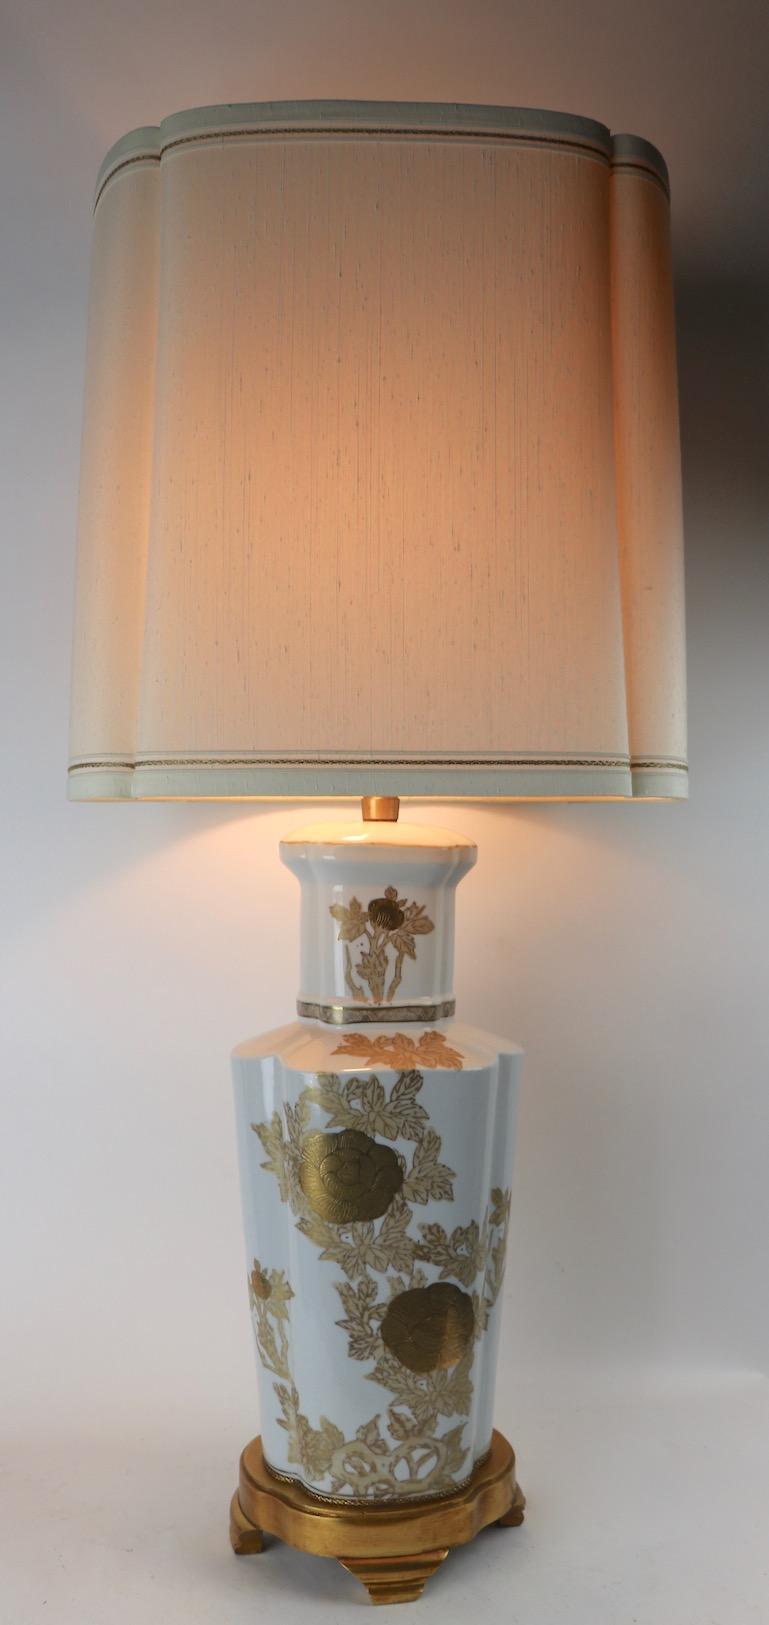 Chinese Style Porcelain Lamp by the Marlboro Lamp Company 9